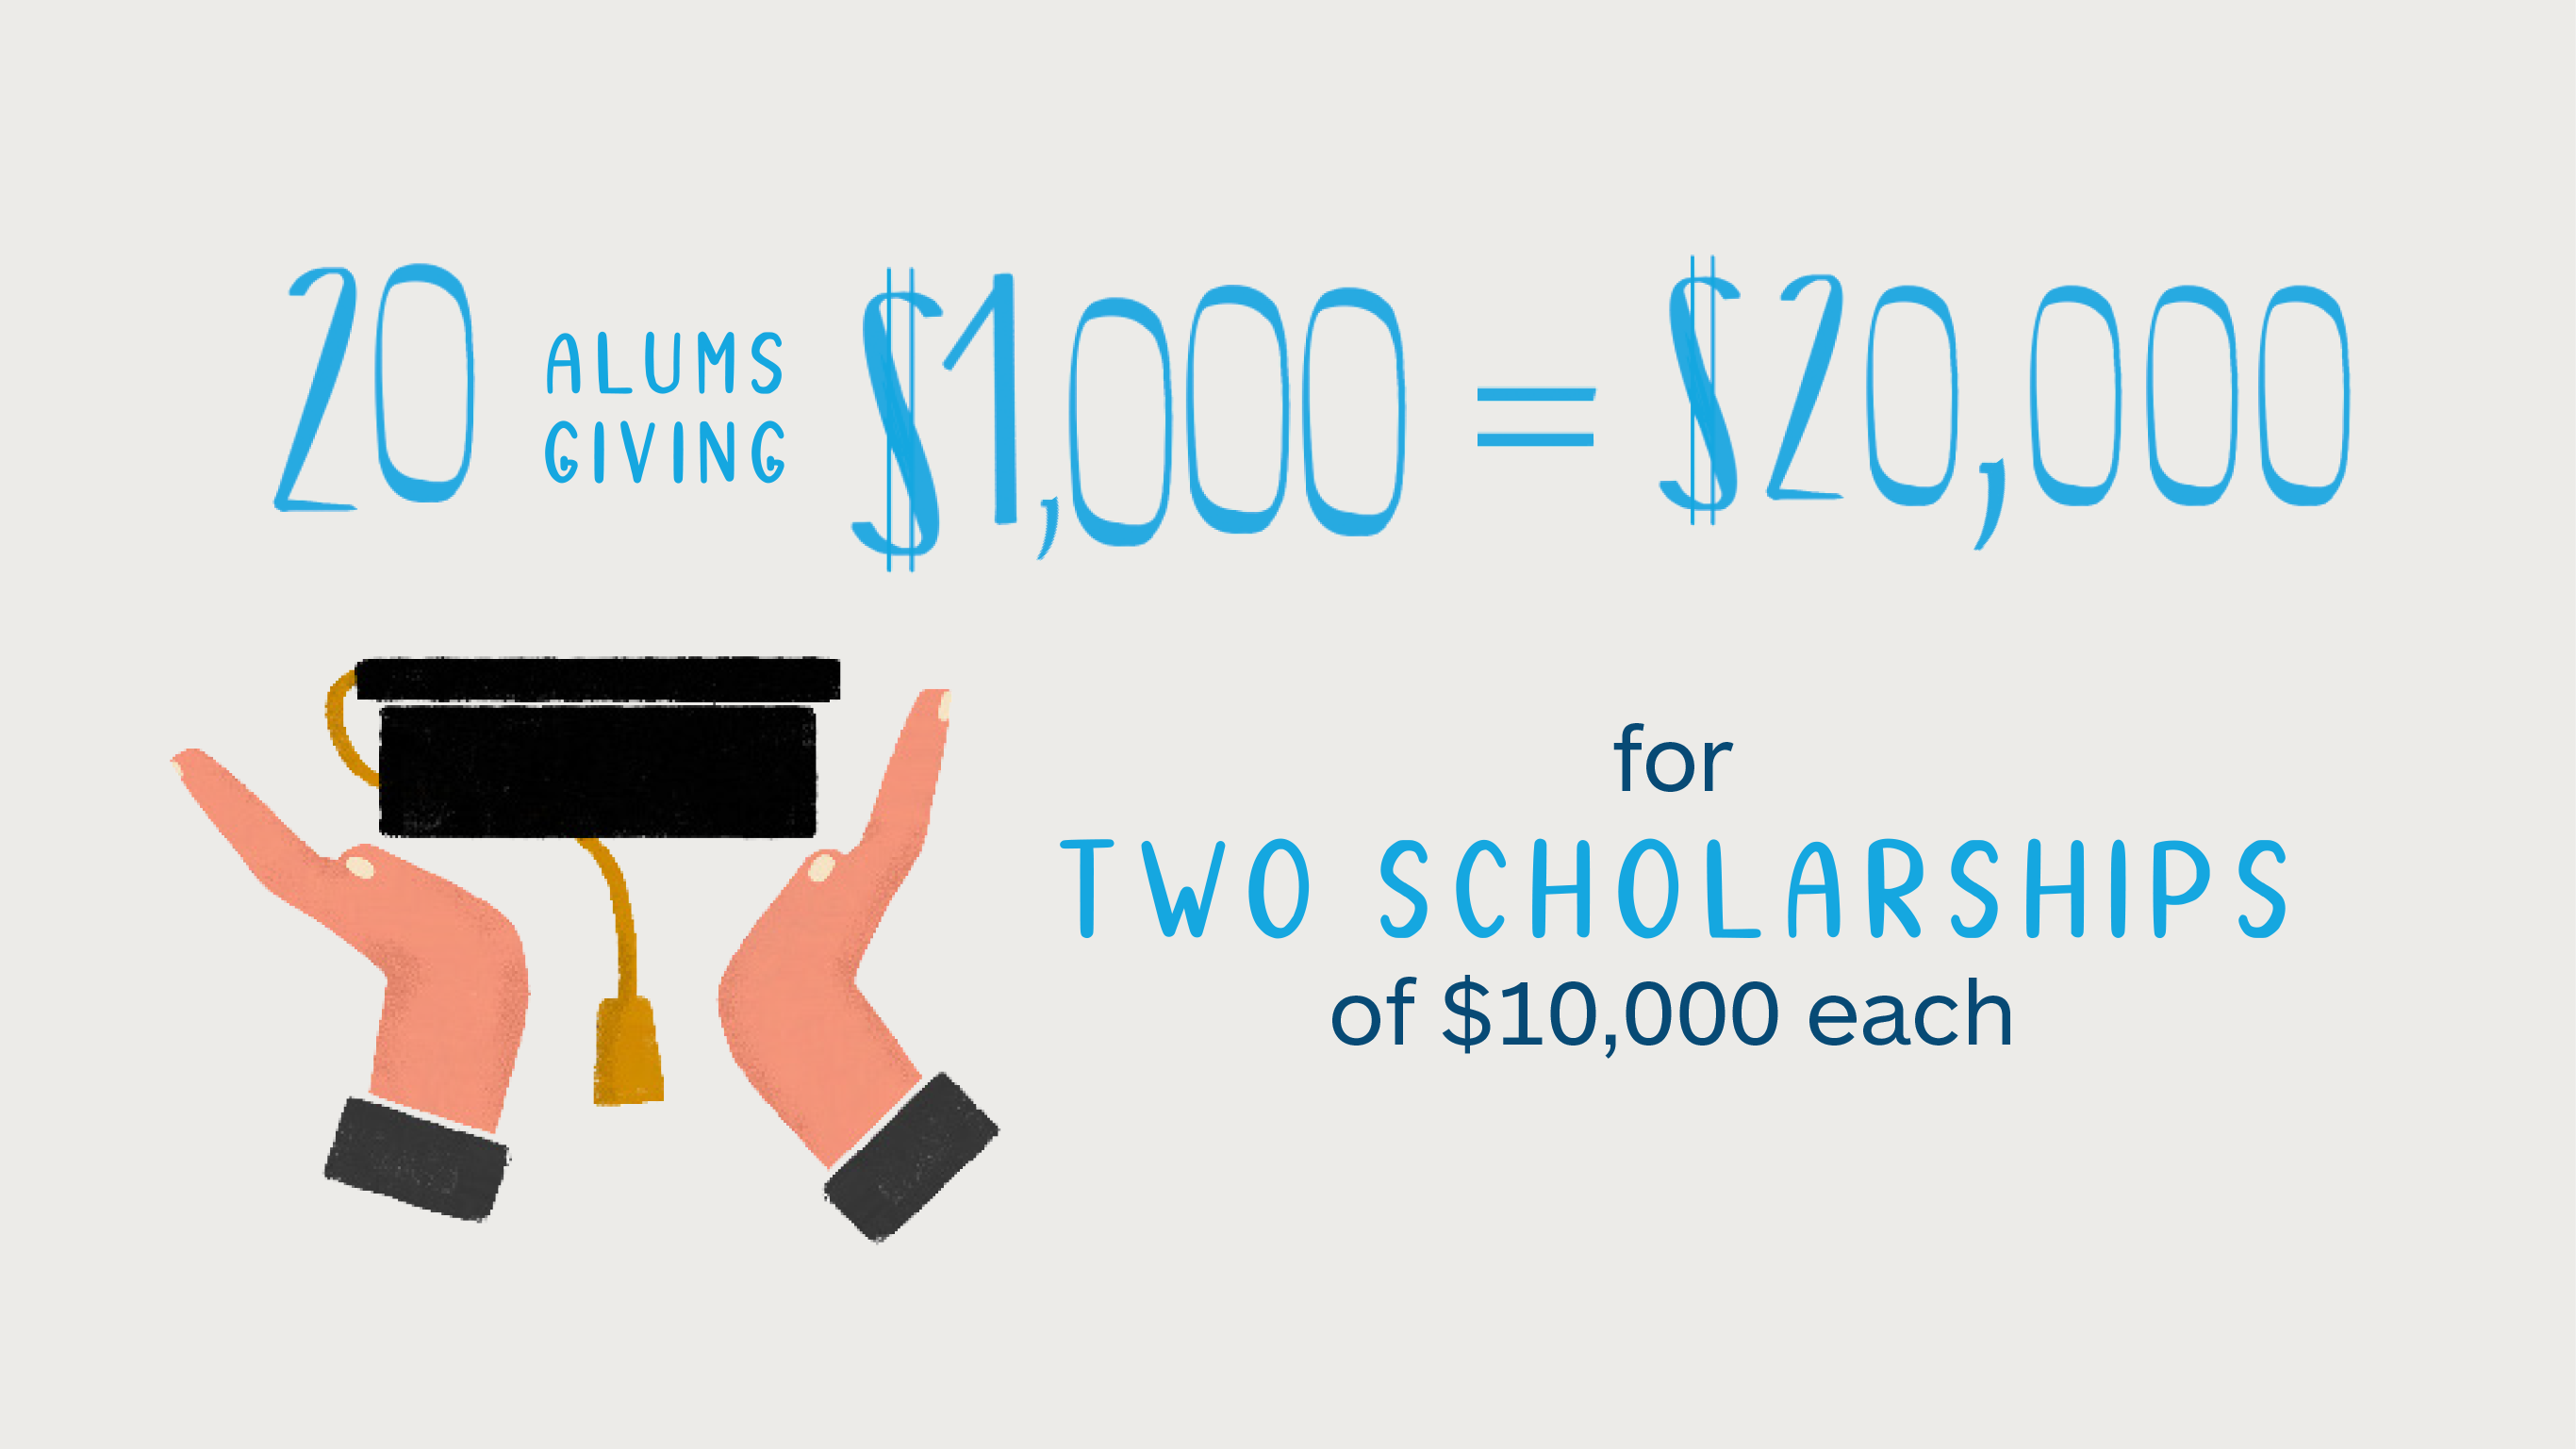 20 alums giving $1,000 = $20,000 for two scholarships of $10,000 each